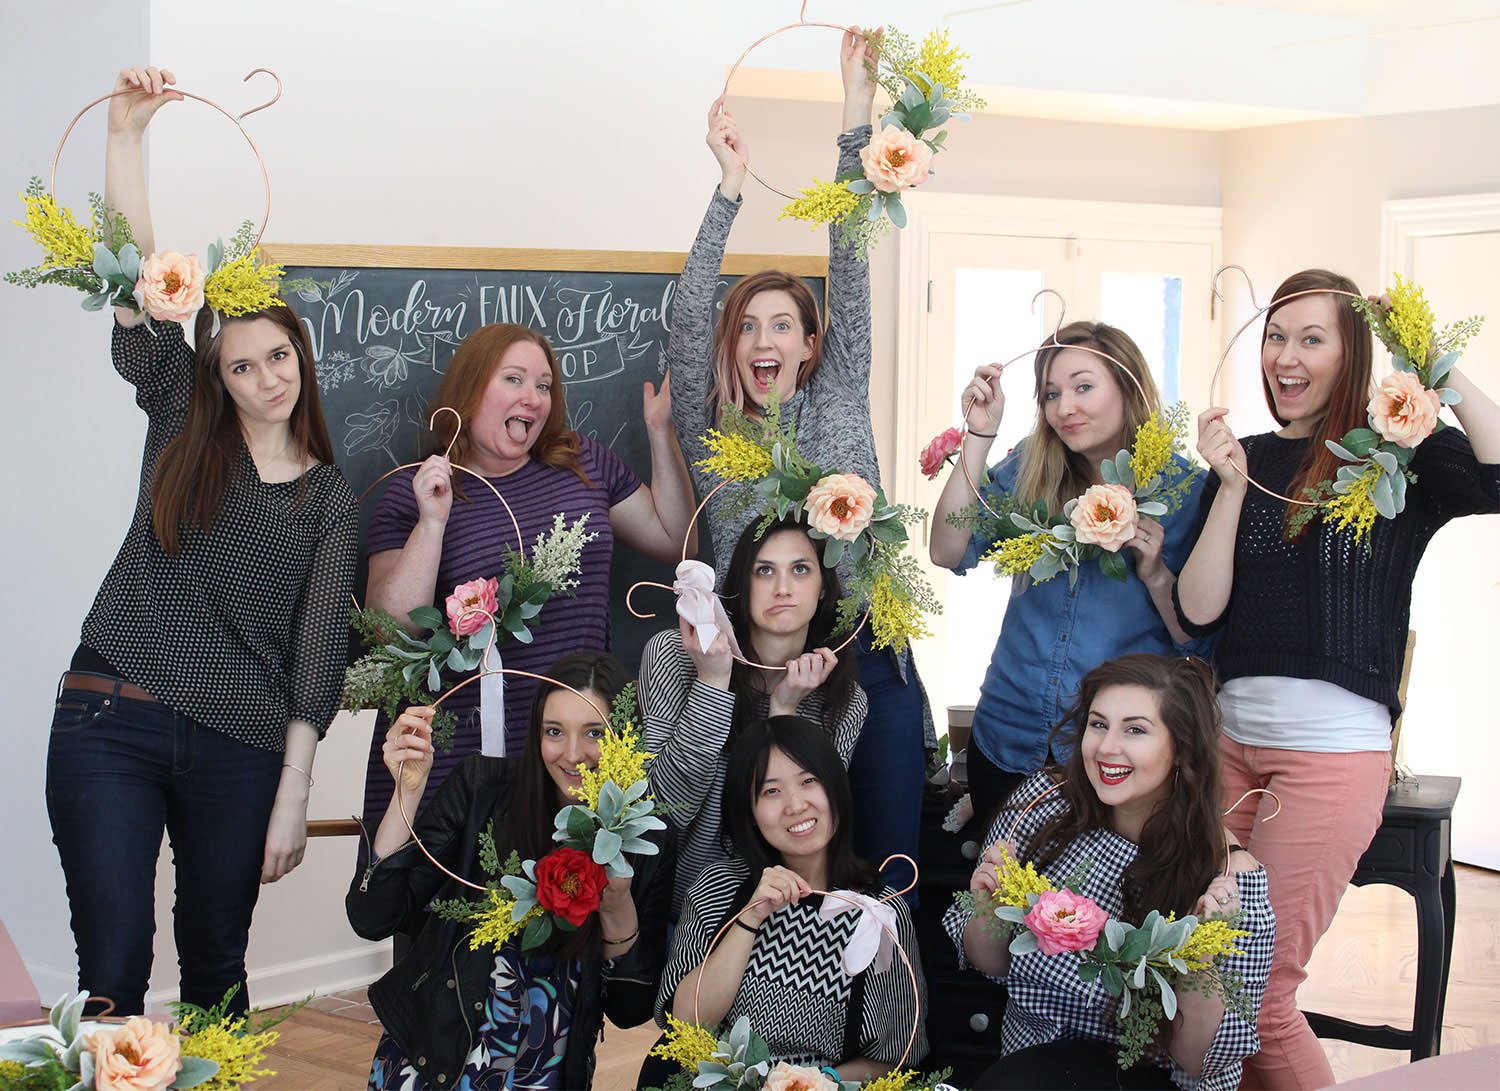 Modern Spring Faux Floral Wreath Workshop held in Pittsburgh at the Lily & Val Flagship Store